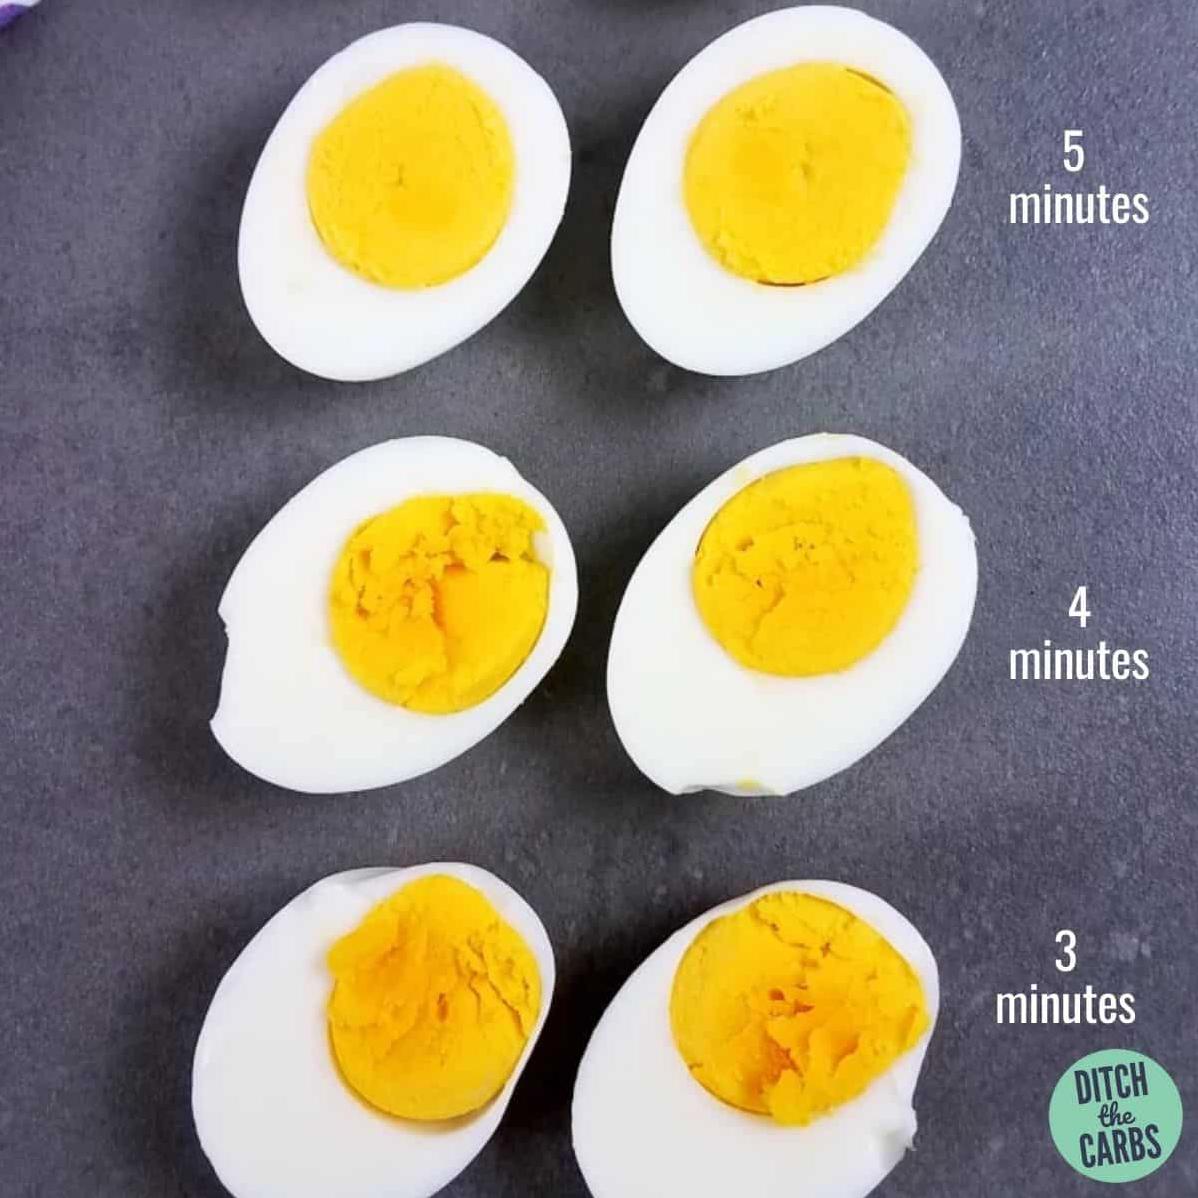  The Instant Pot takes the guesswork out of boiling eggs